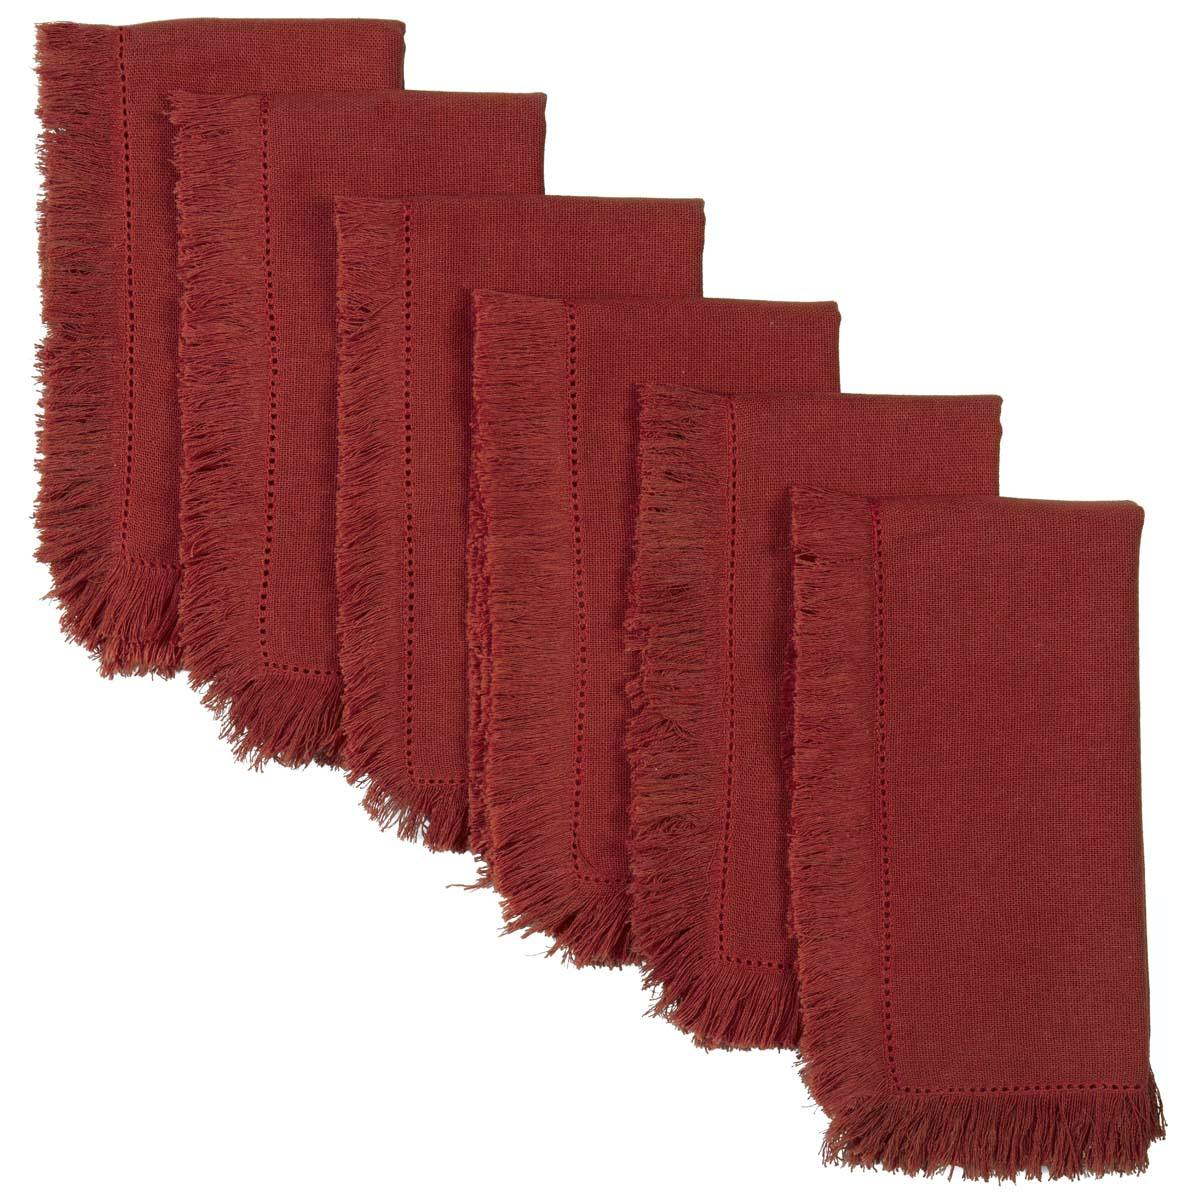 Haven Red Napkin Set of 6 VHC Brands - The Fox Decor